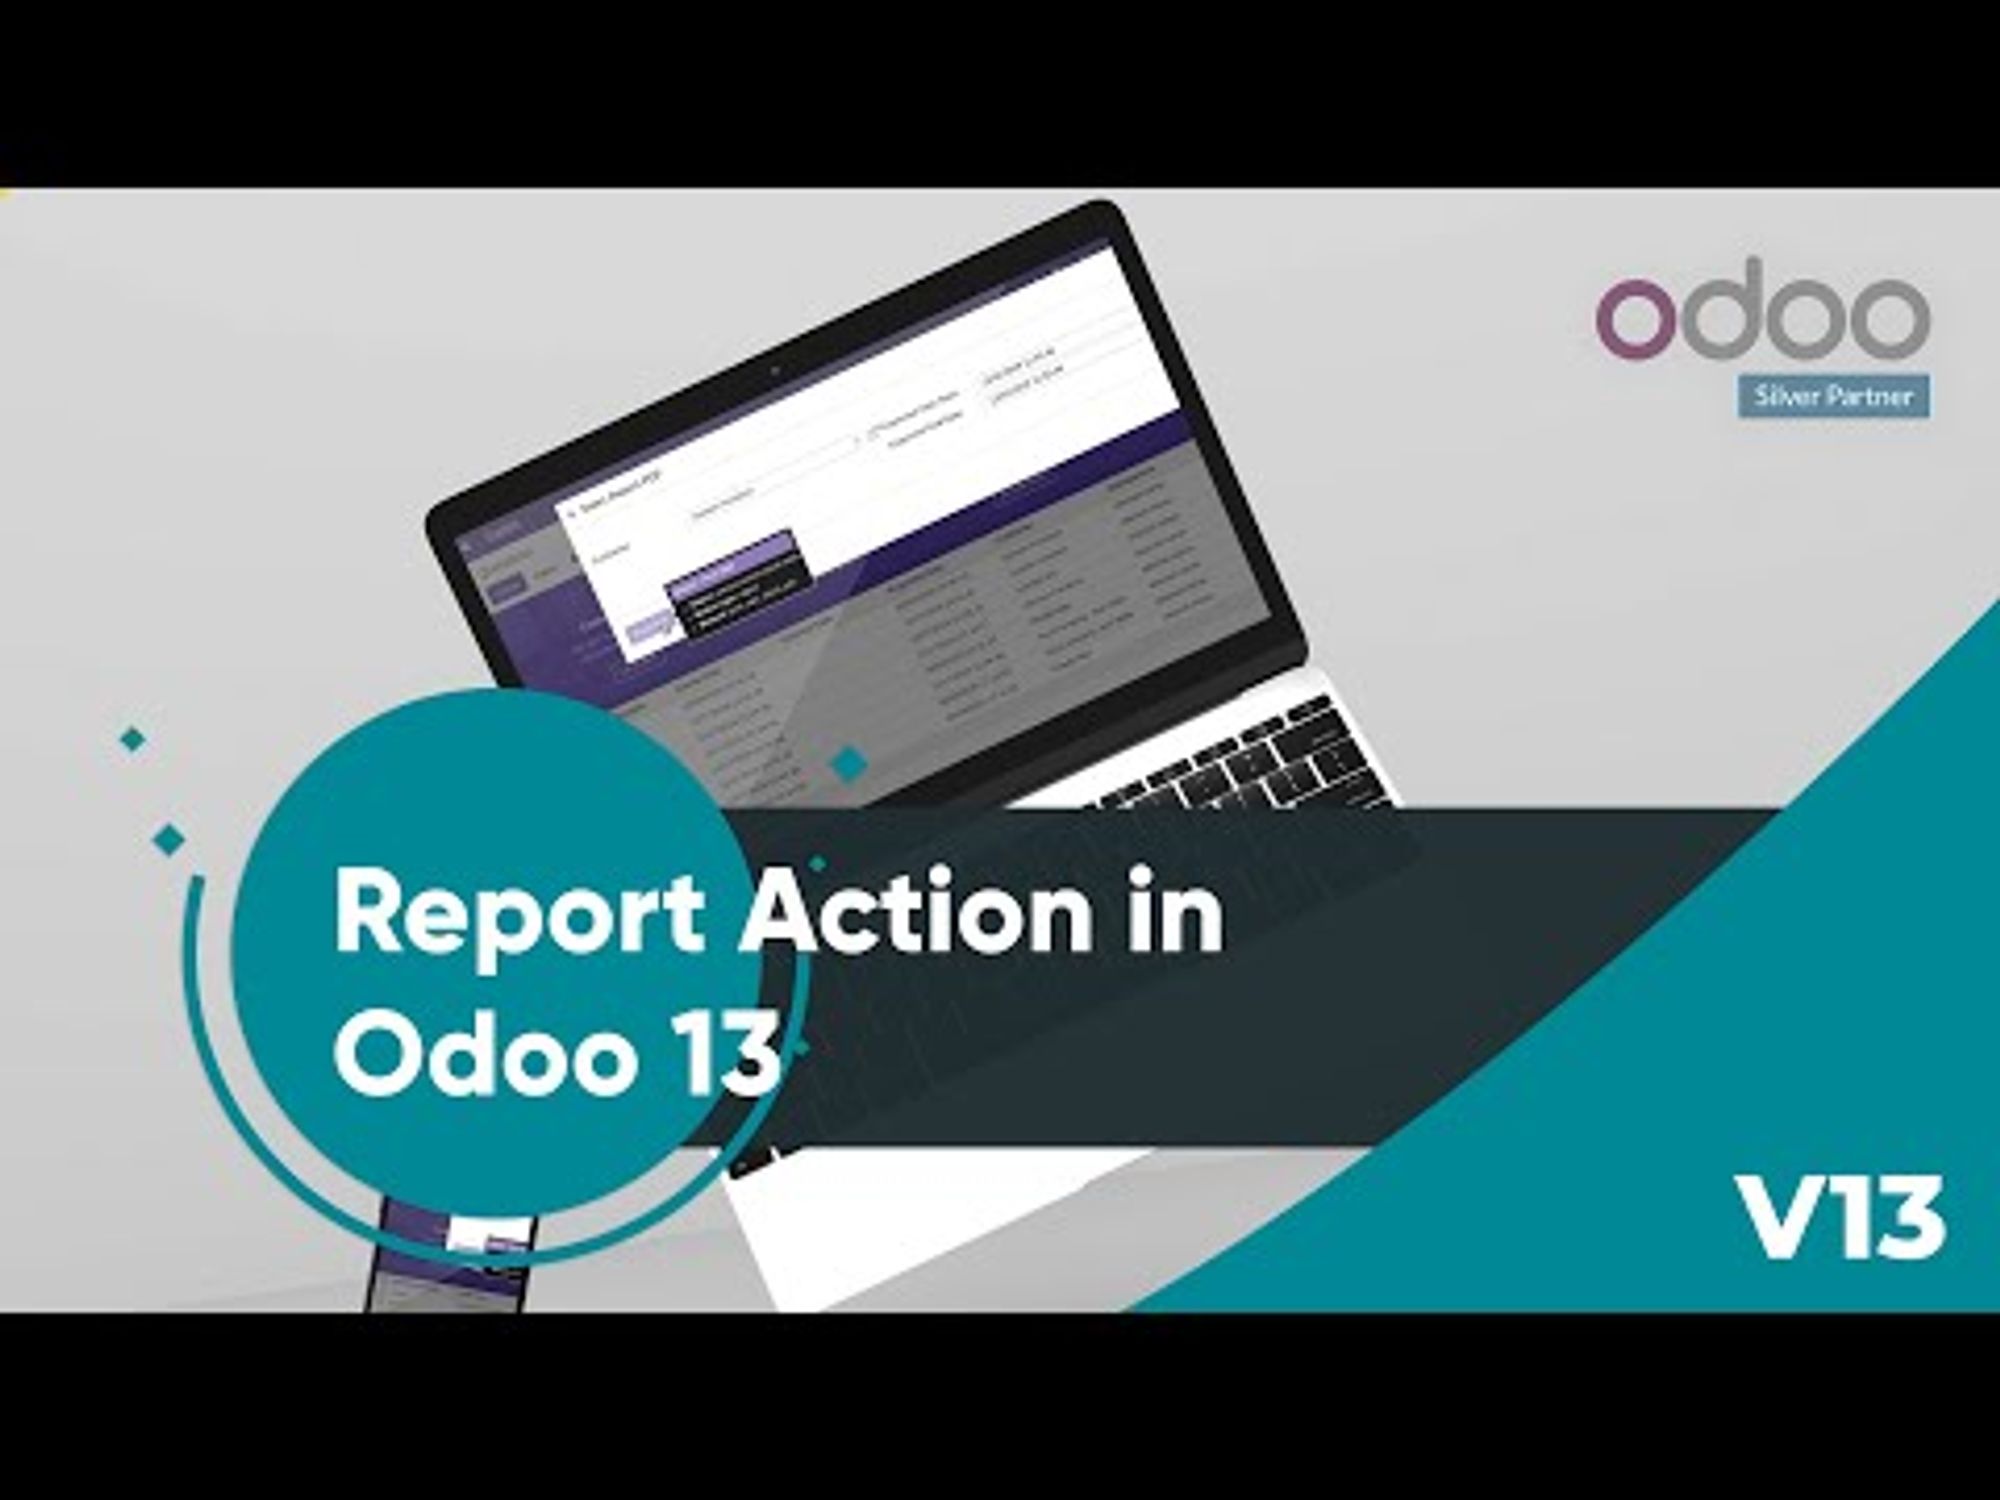 Report Action in Odoo 13